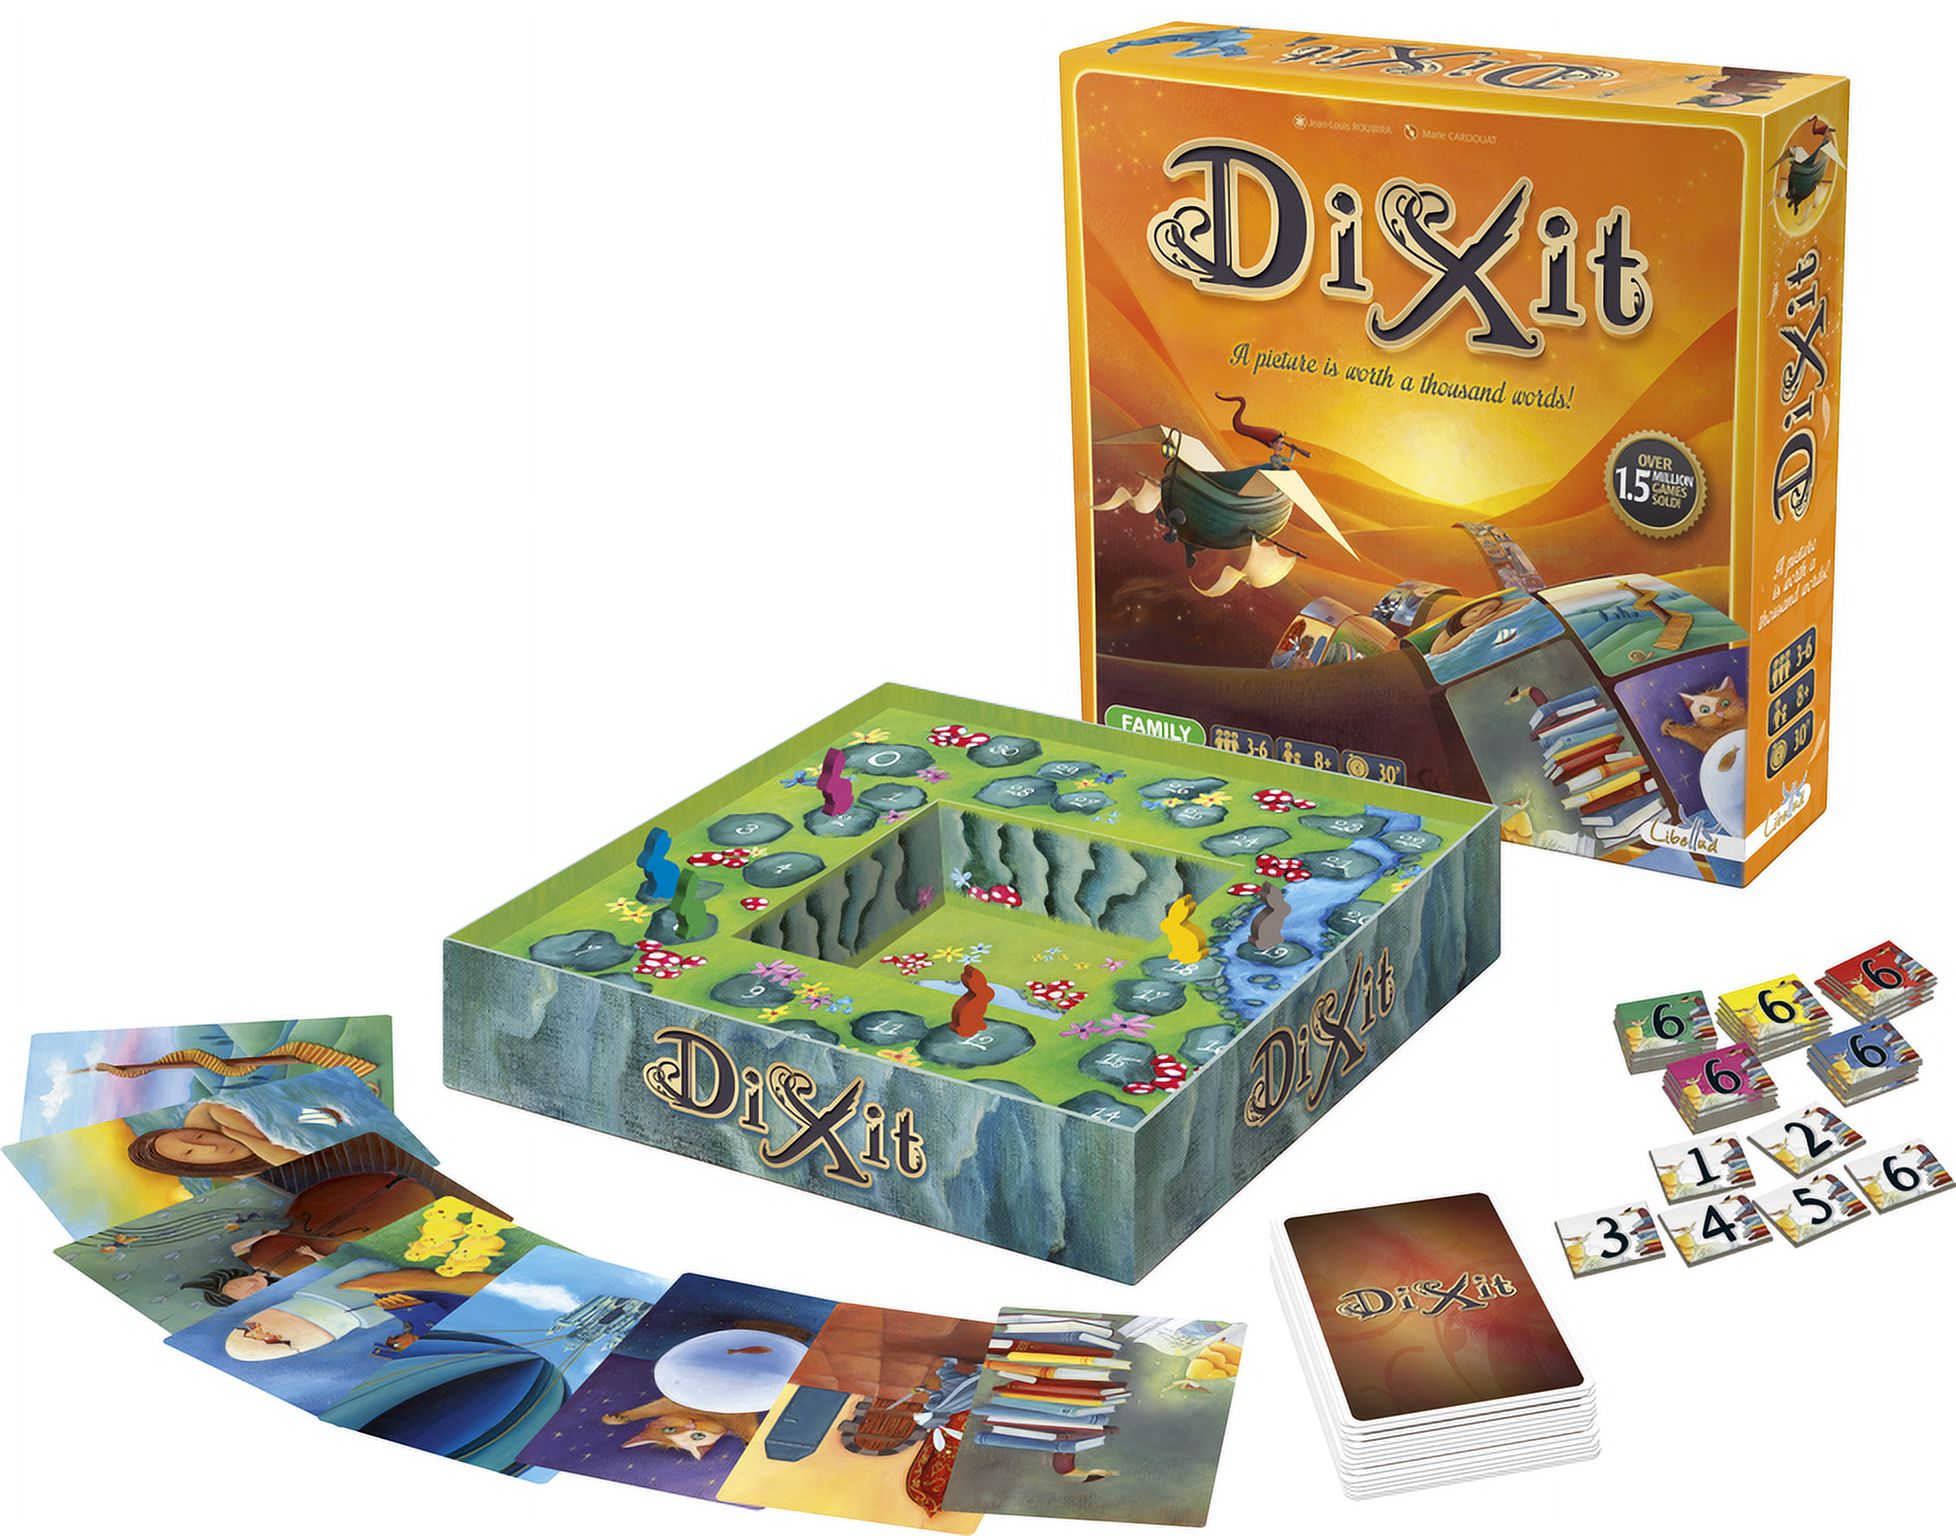 Dixit - image 3 of 3